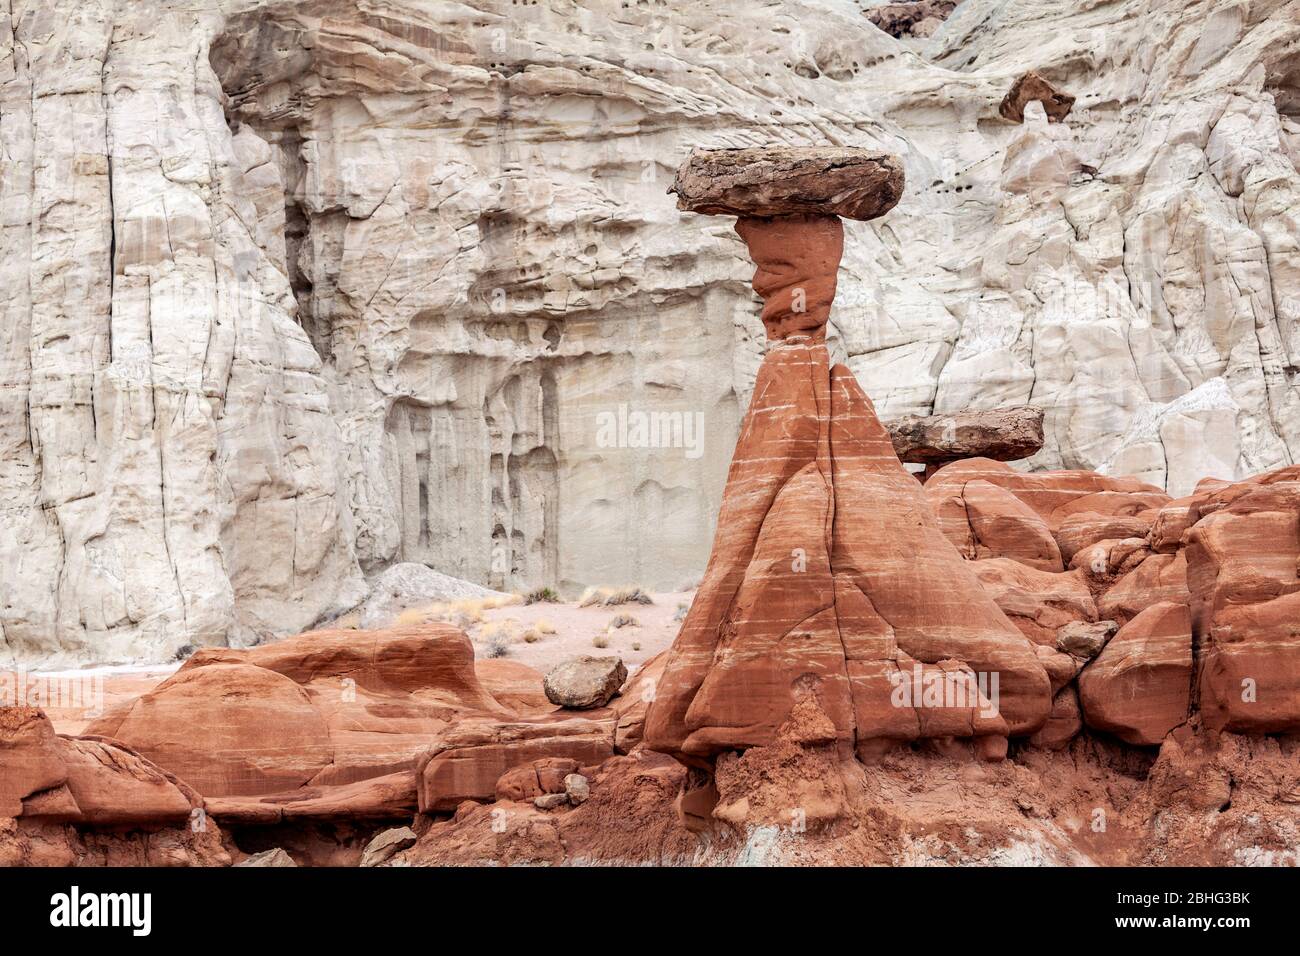 UT00507-00...UTAH - The Toadstools, a rock formation area along Highway 89 administered by the BLM. Stock Photo